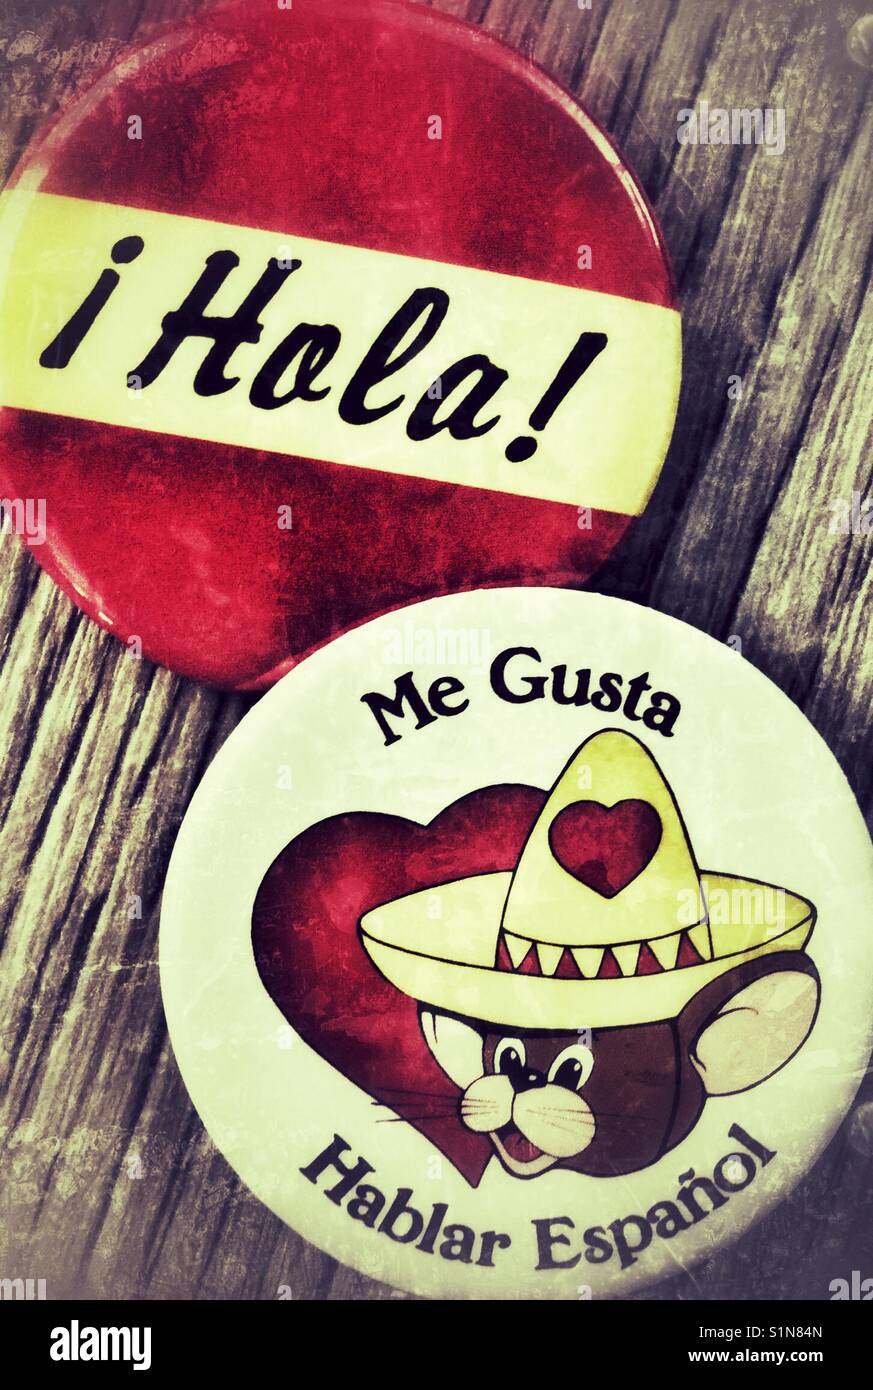 Buttons promoting Spanish language learning. Stock Photo